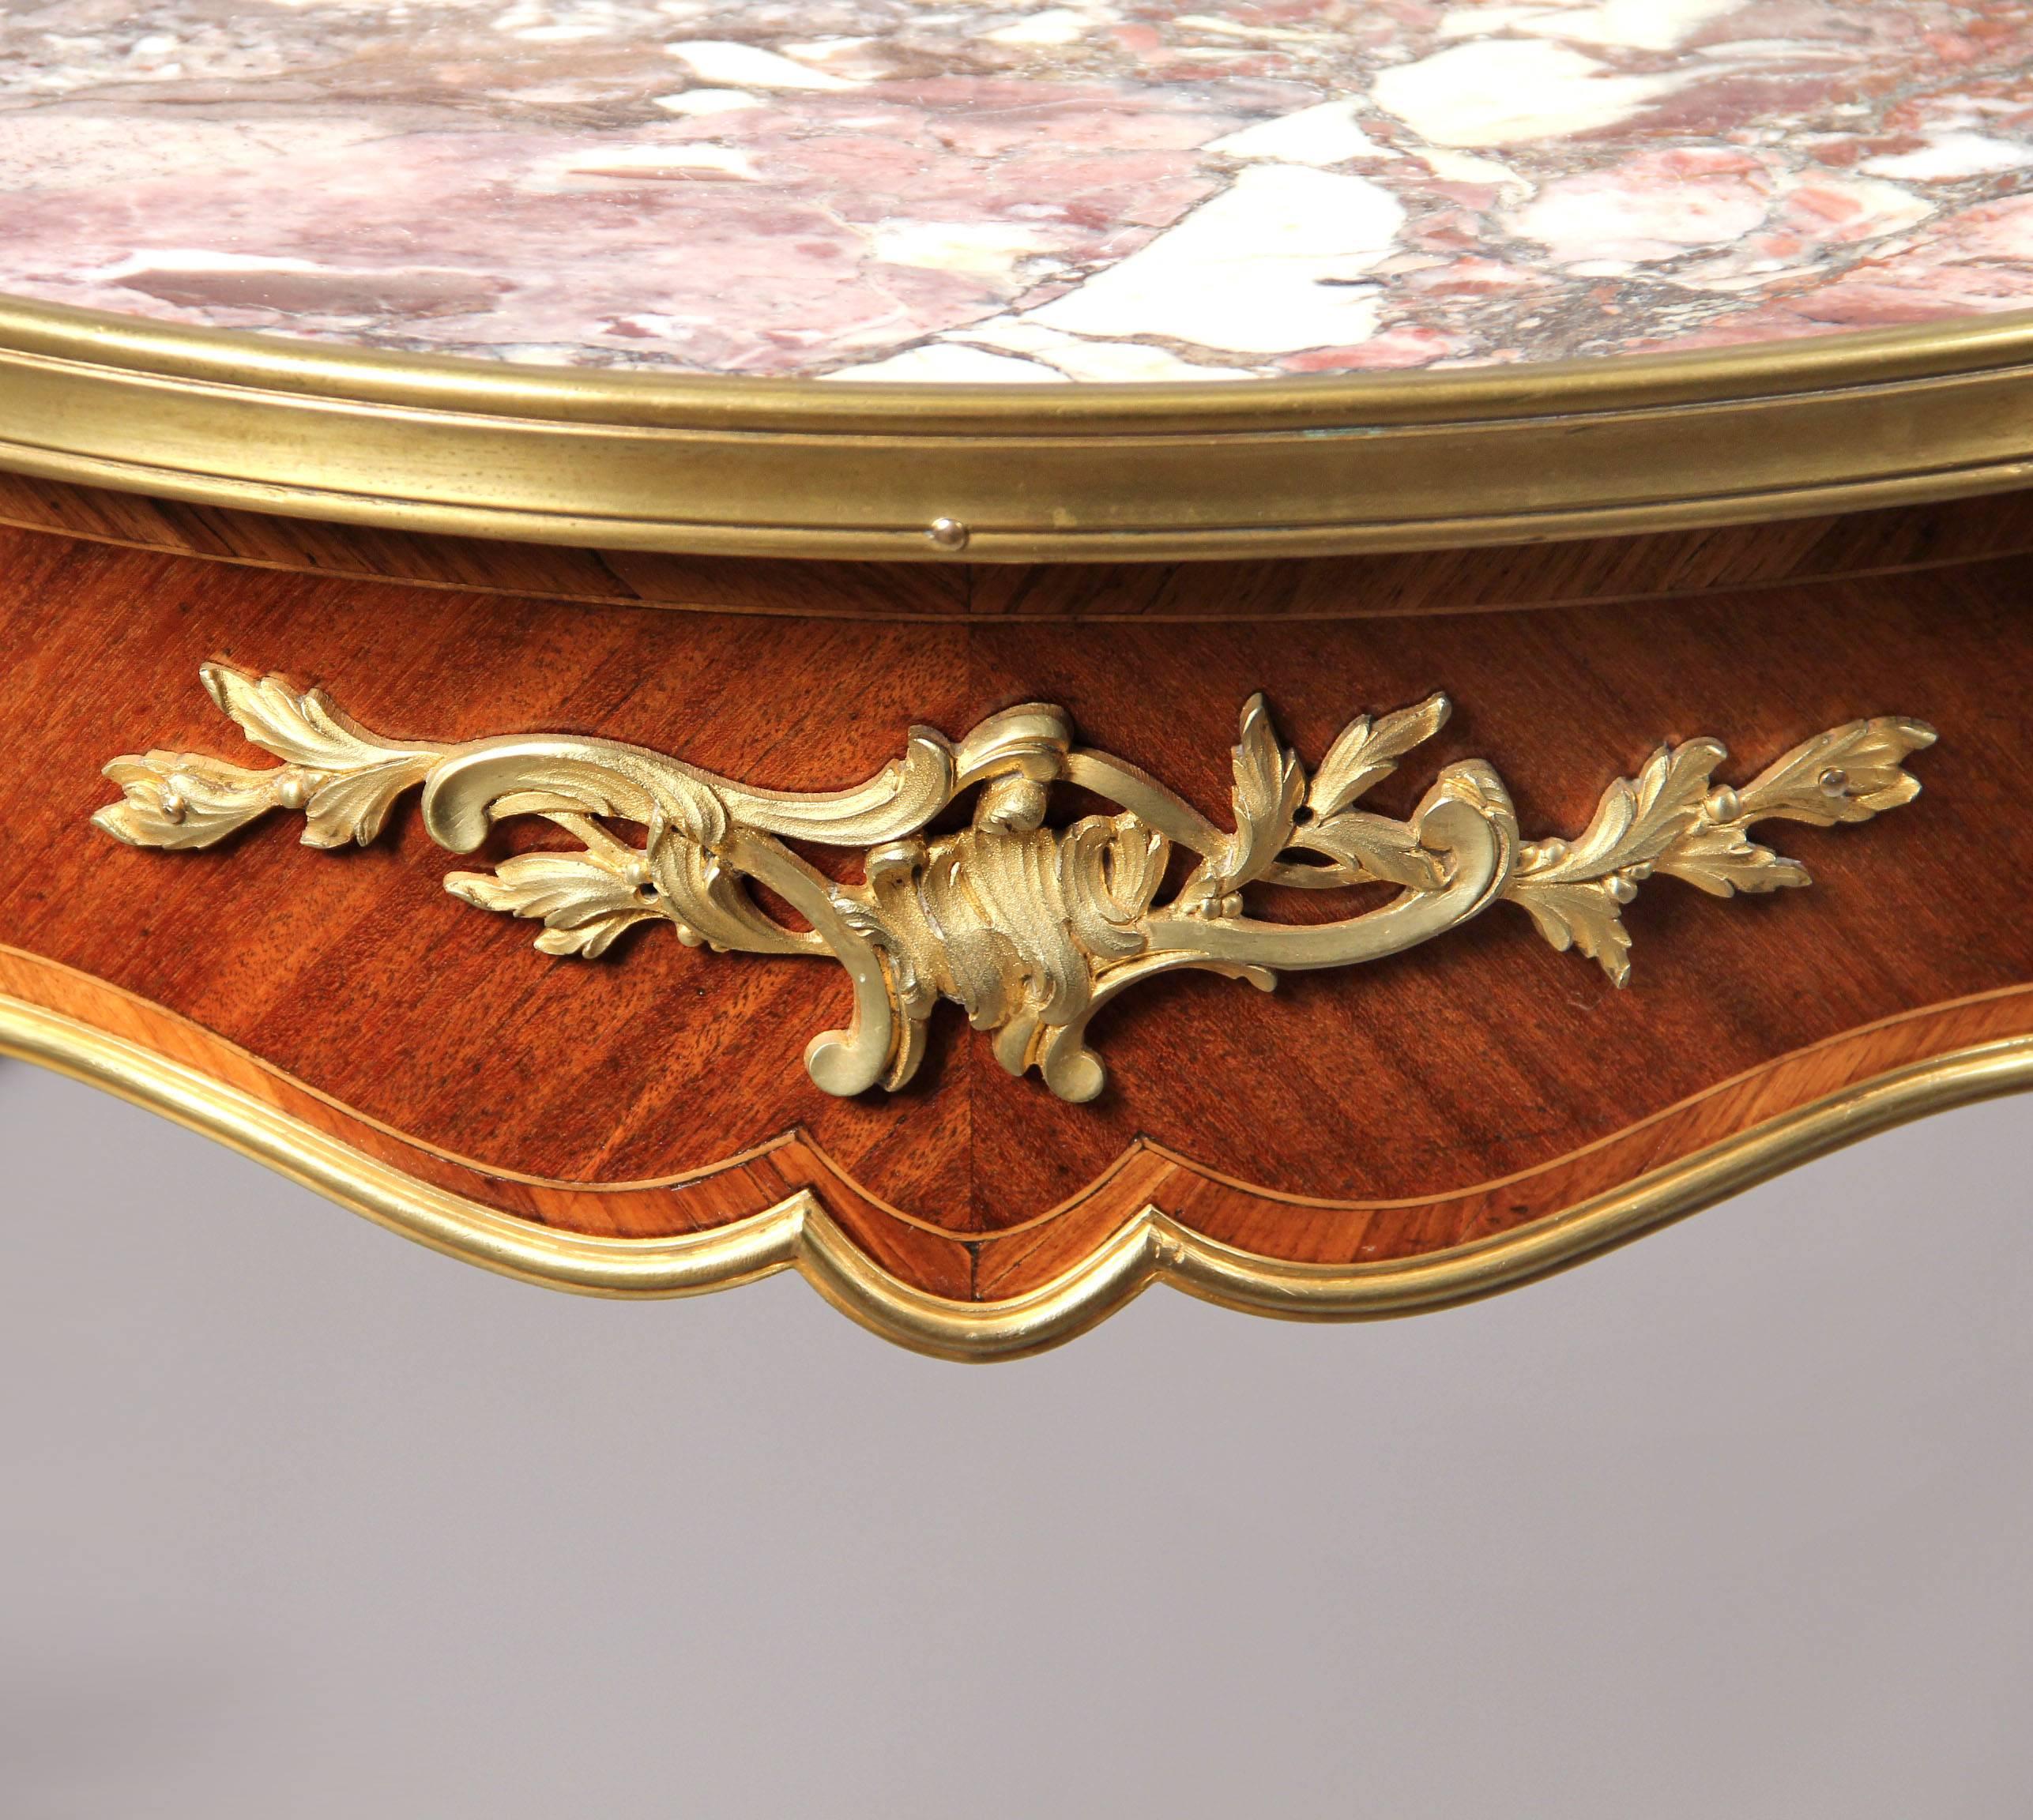 A late 19th century Louis XV style gilt bronze-mounted marble-top lamp table.

The shaped circular Breche Violette marble insert top, above a bronze mounted frieze, on tapering bronze mounted legs and scrolled acanthus sabots.